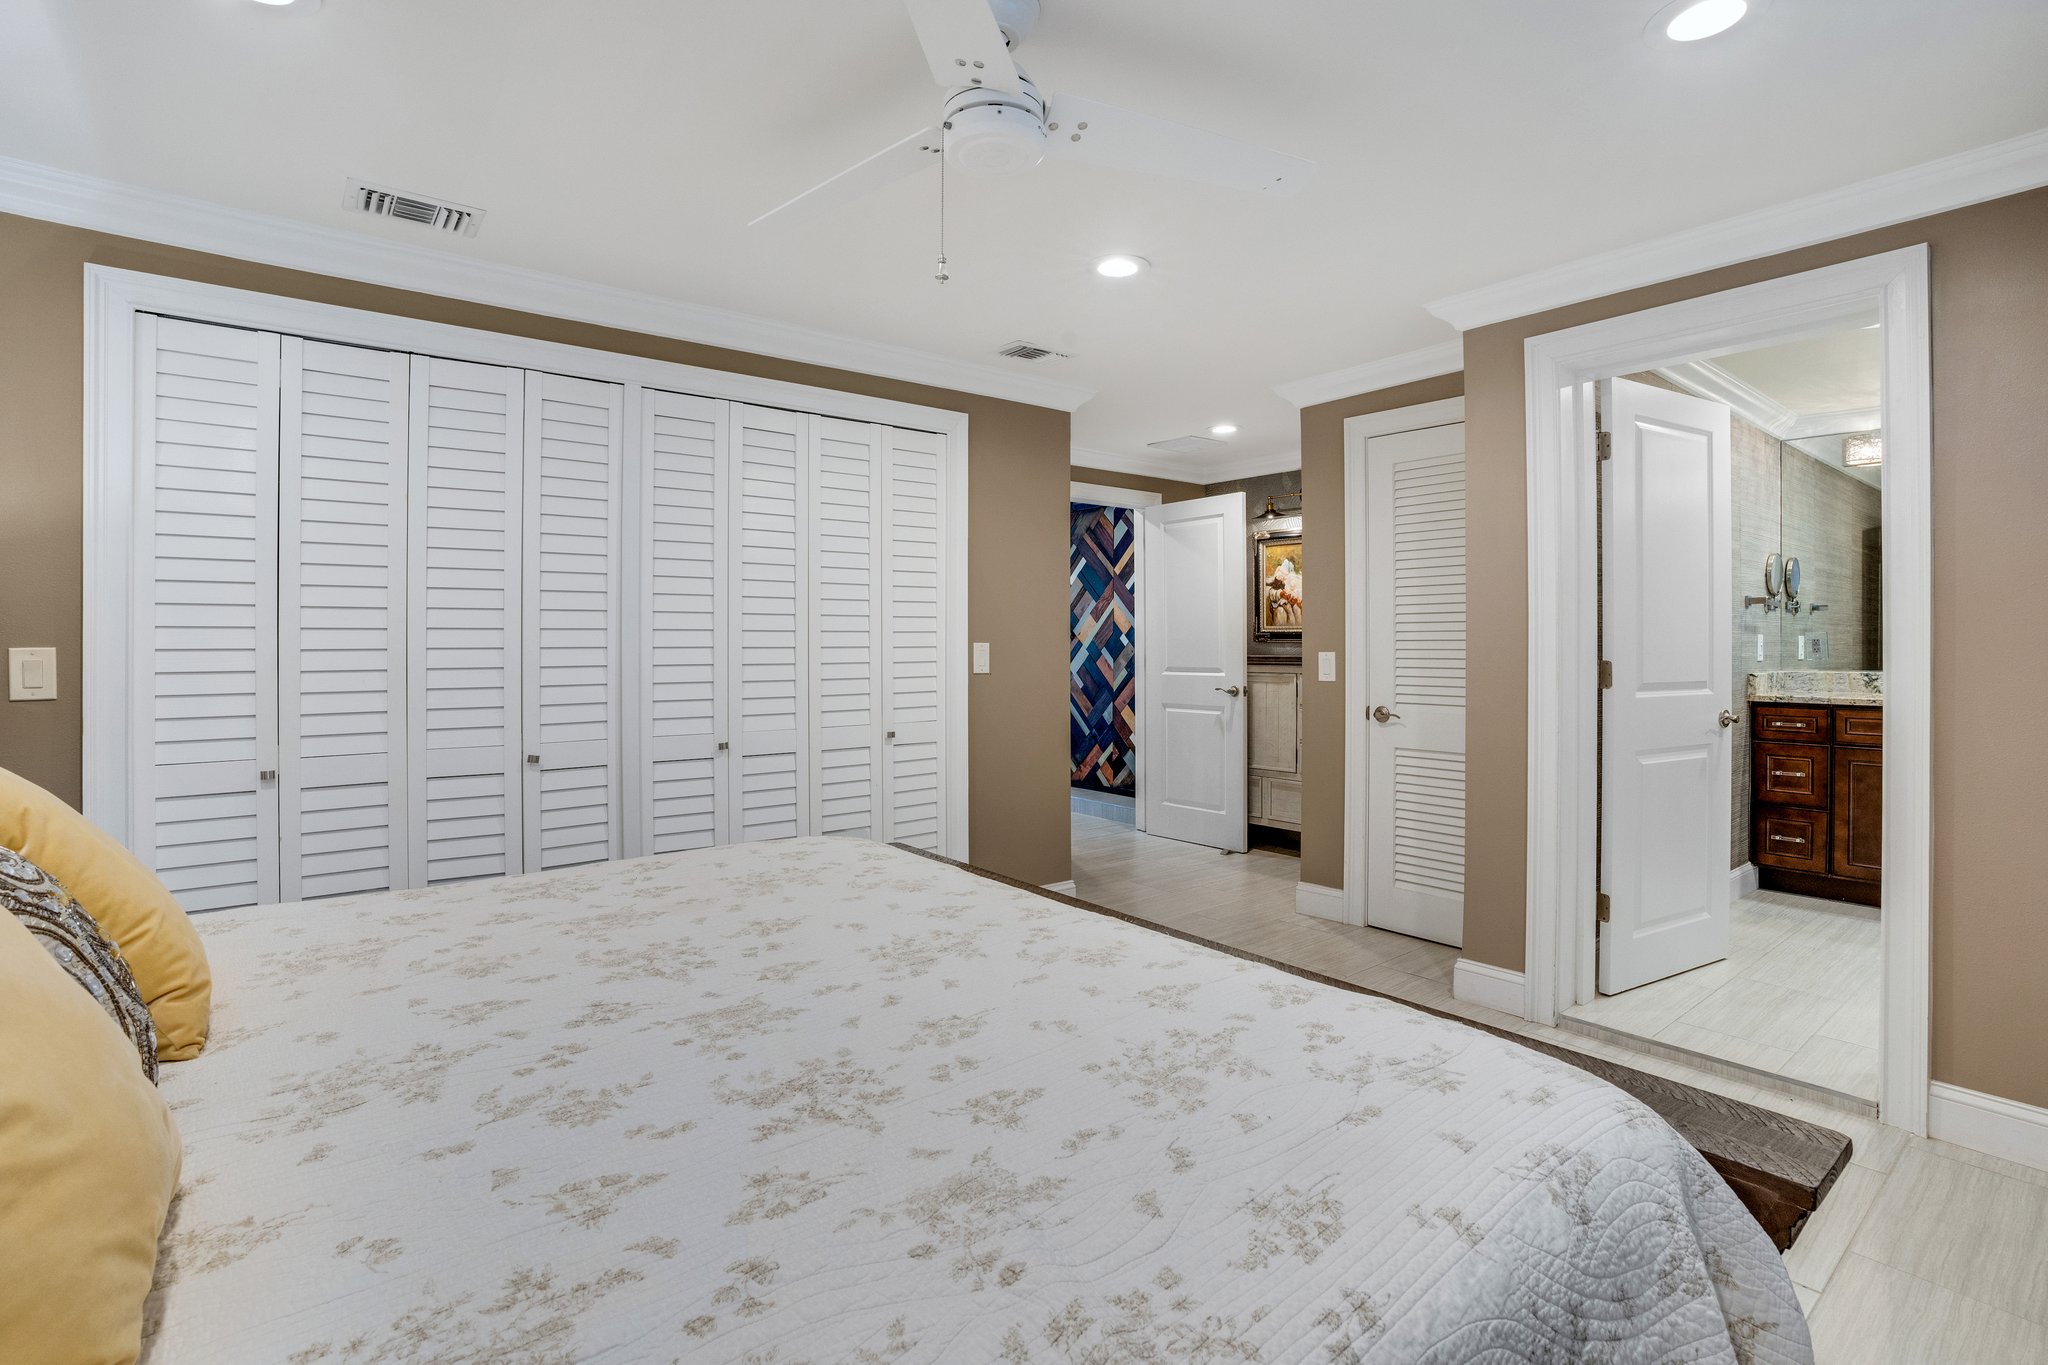 Primary Bedroom with 2 closets